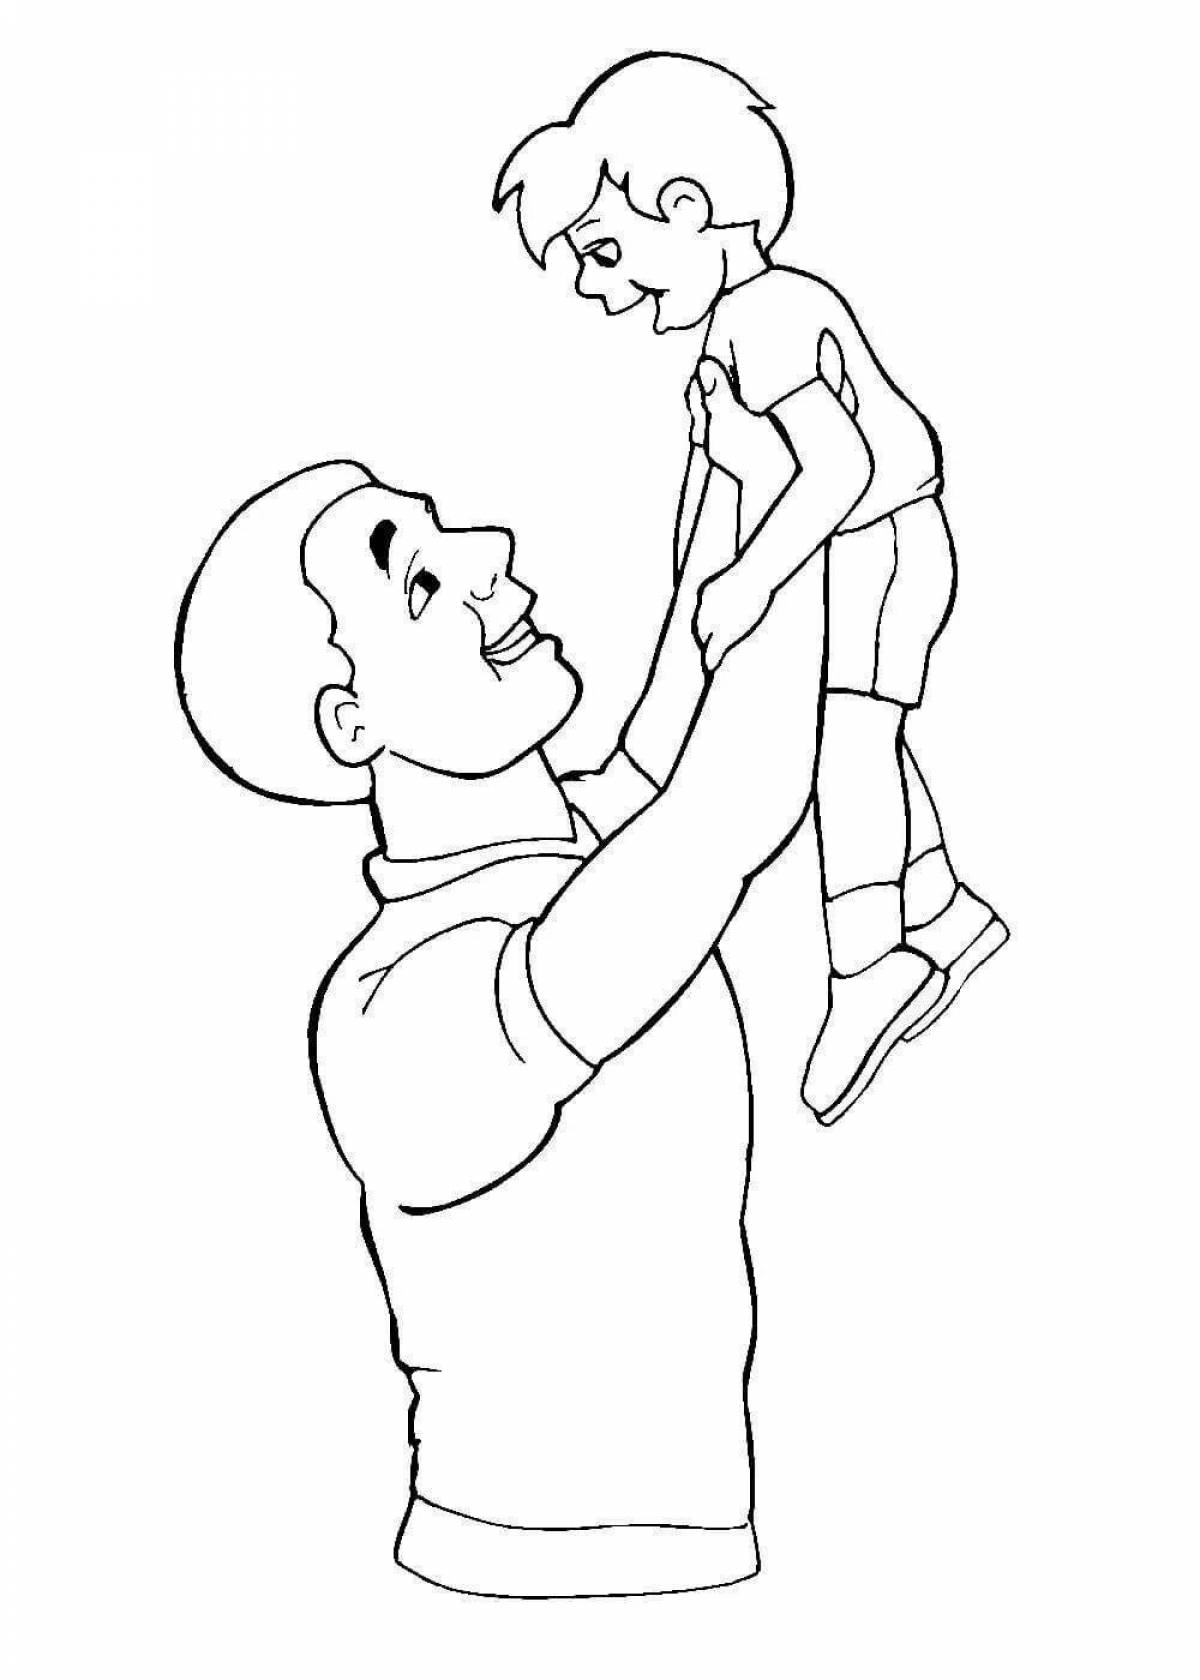 Great coloring book for dad for dad's day